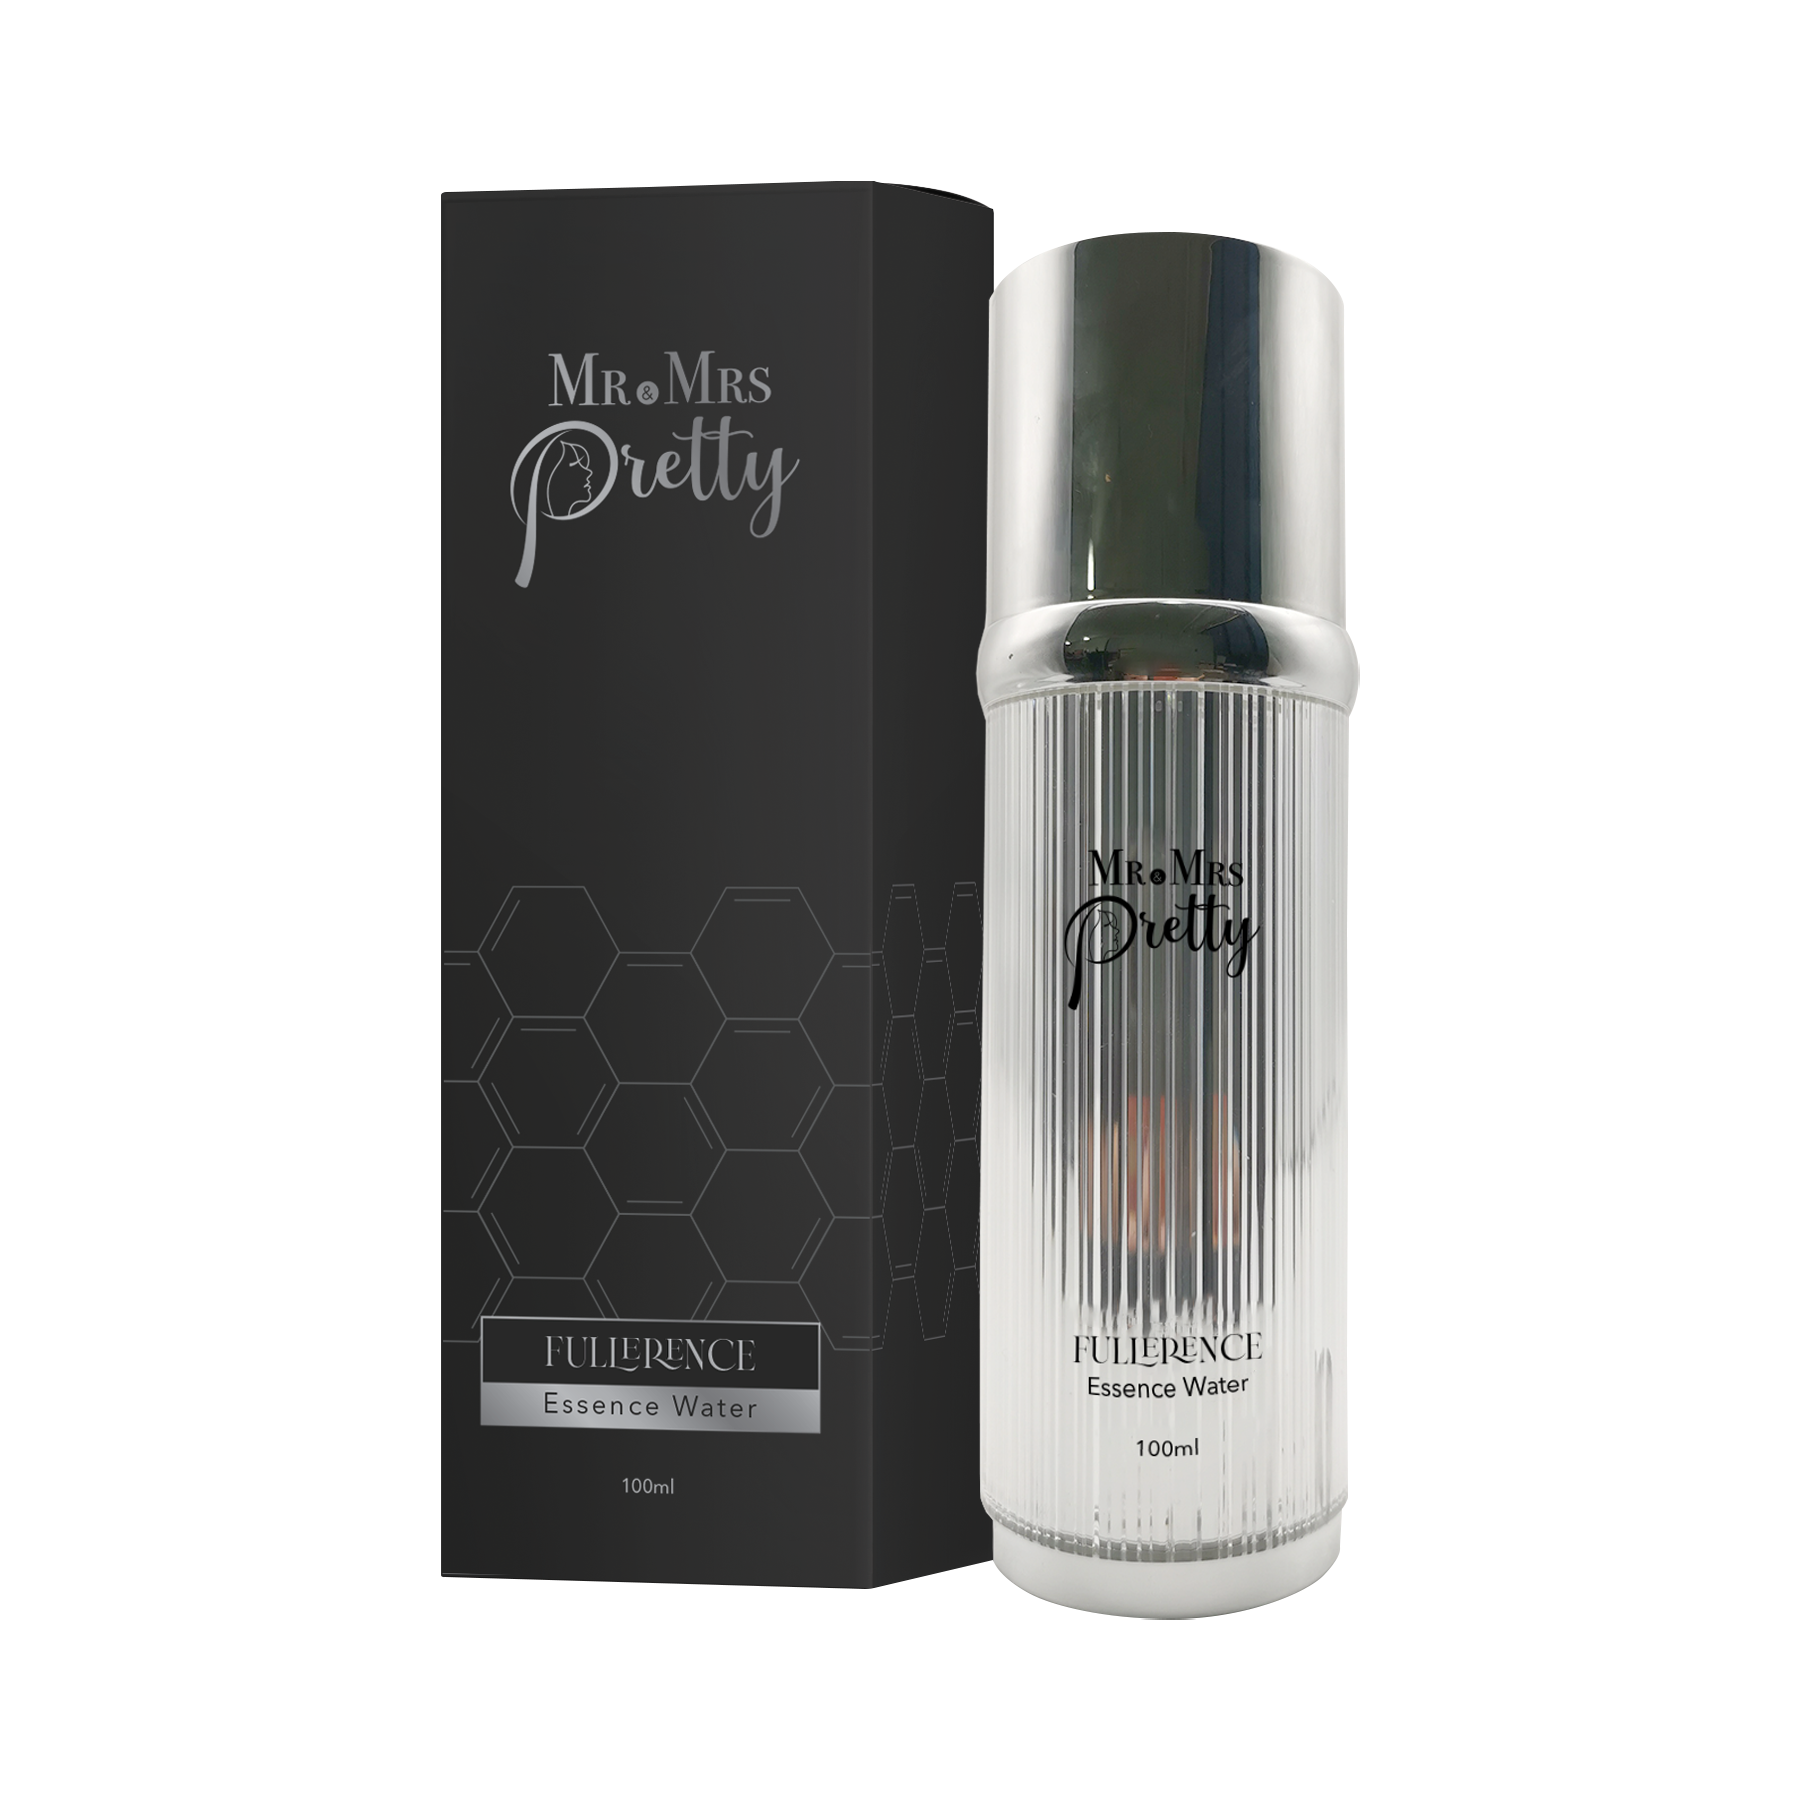 Mr & Mrs Pretty Fullerence Essence Water 100ml